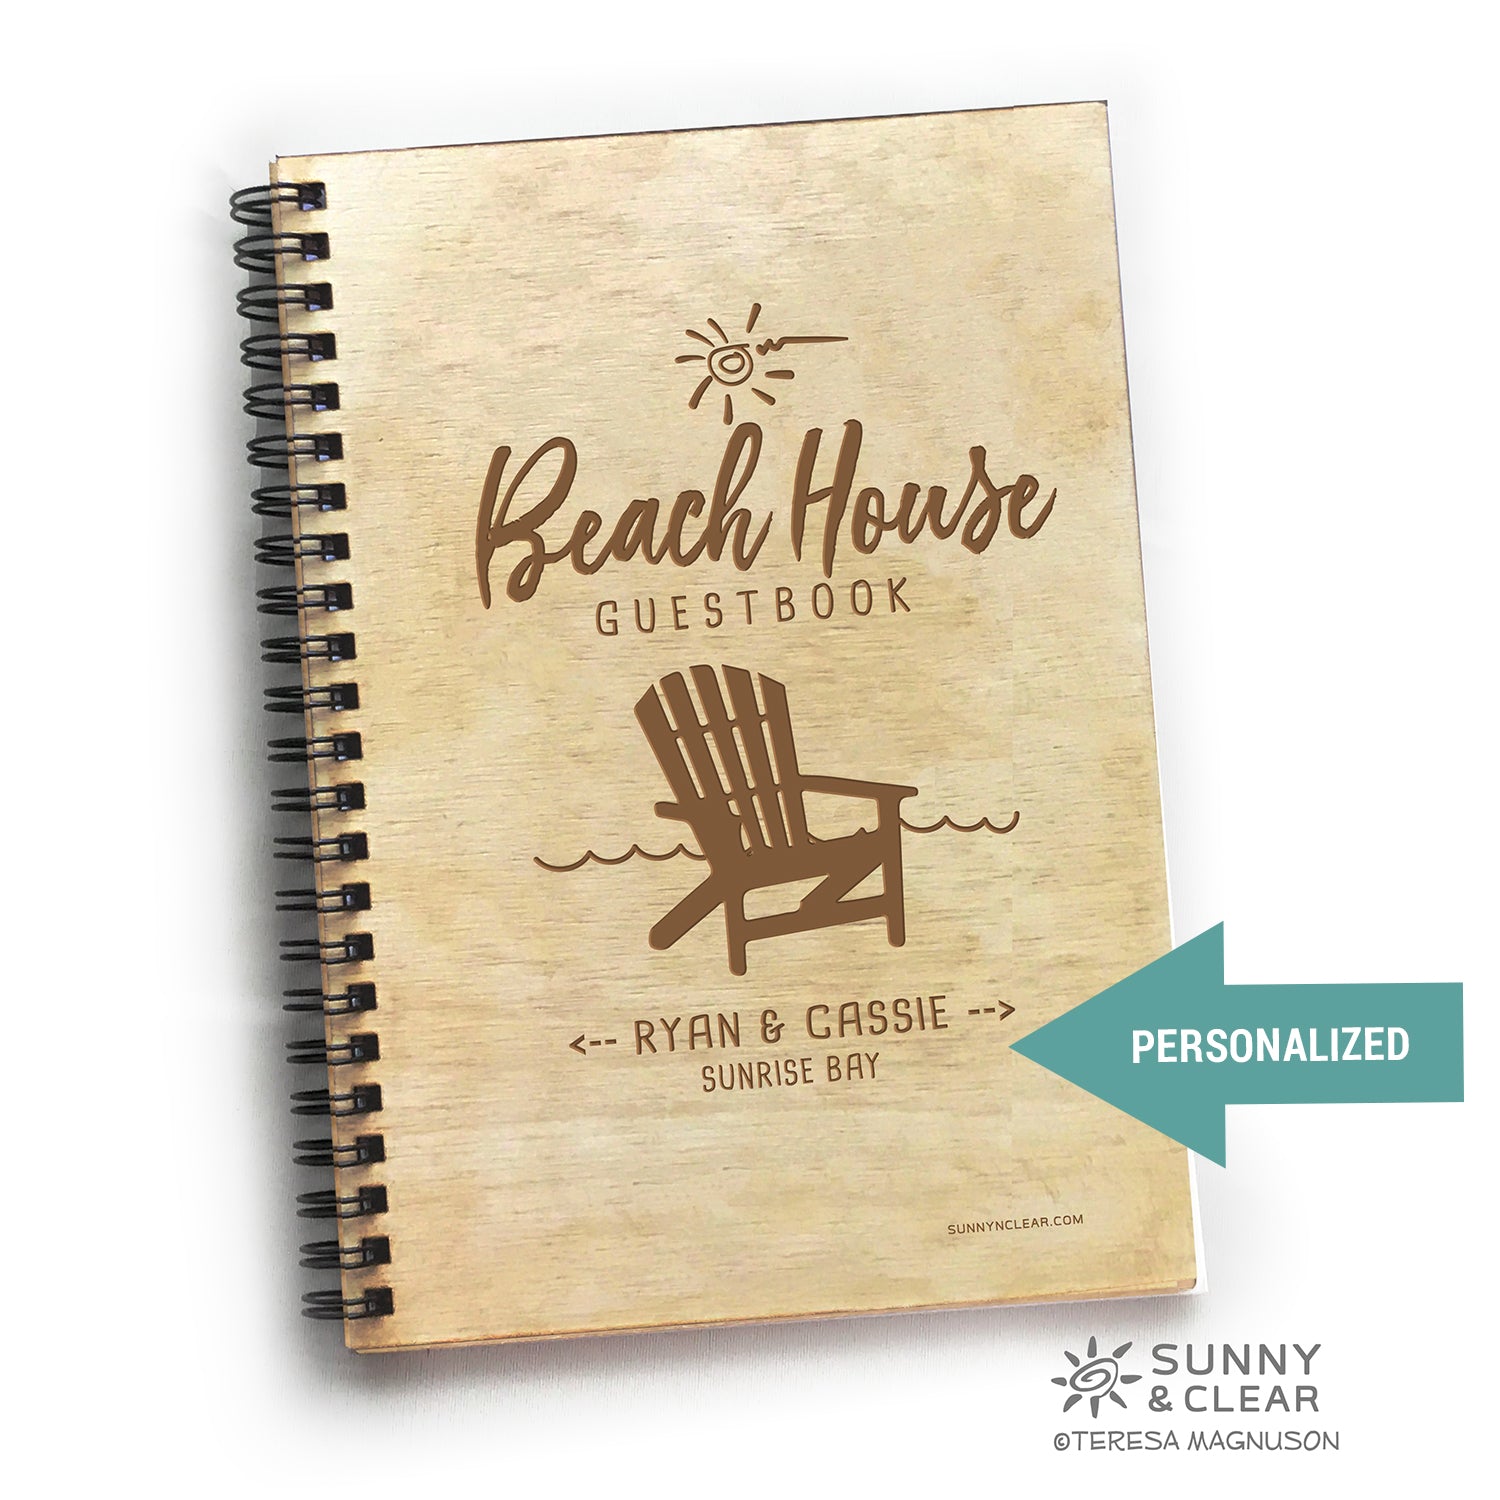 Tropical Home Guest Book, Beach House Guest Book, Visitors Book